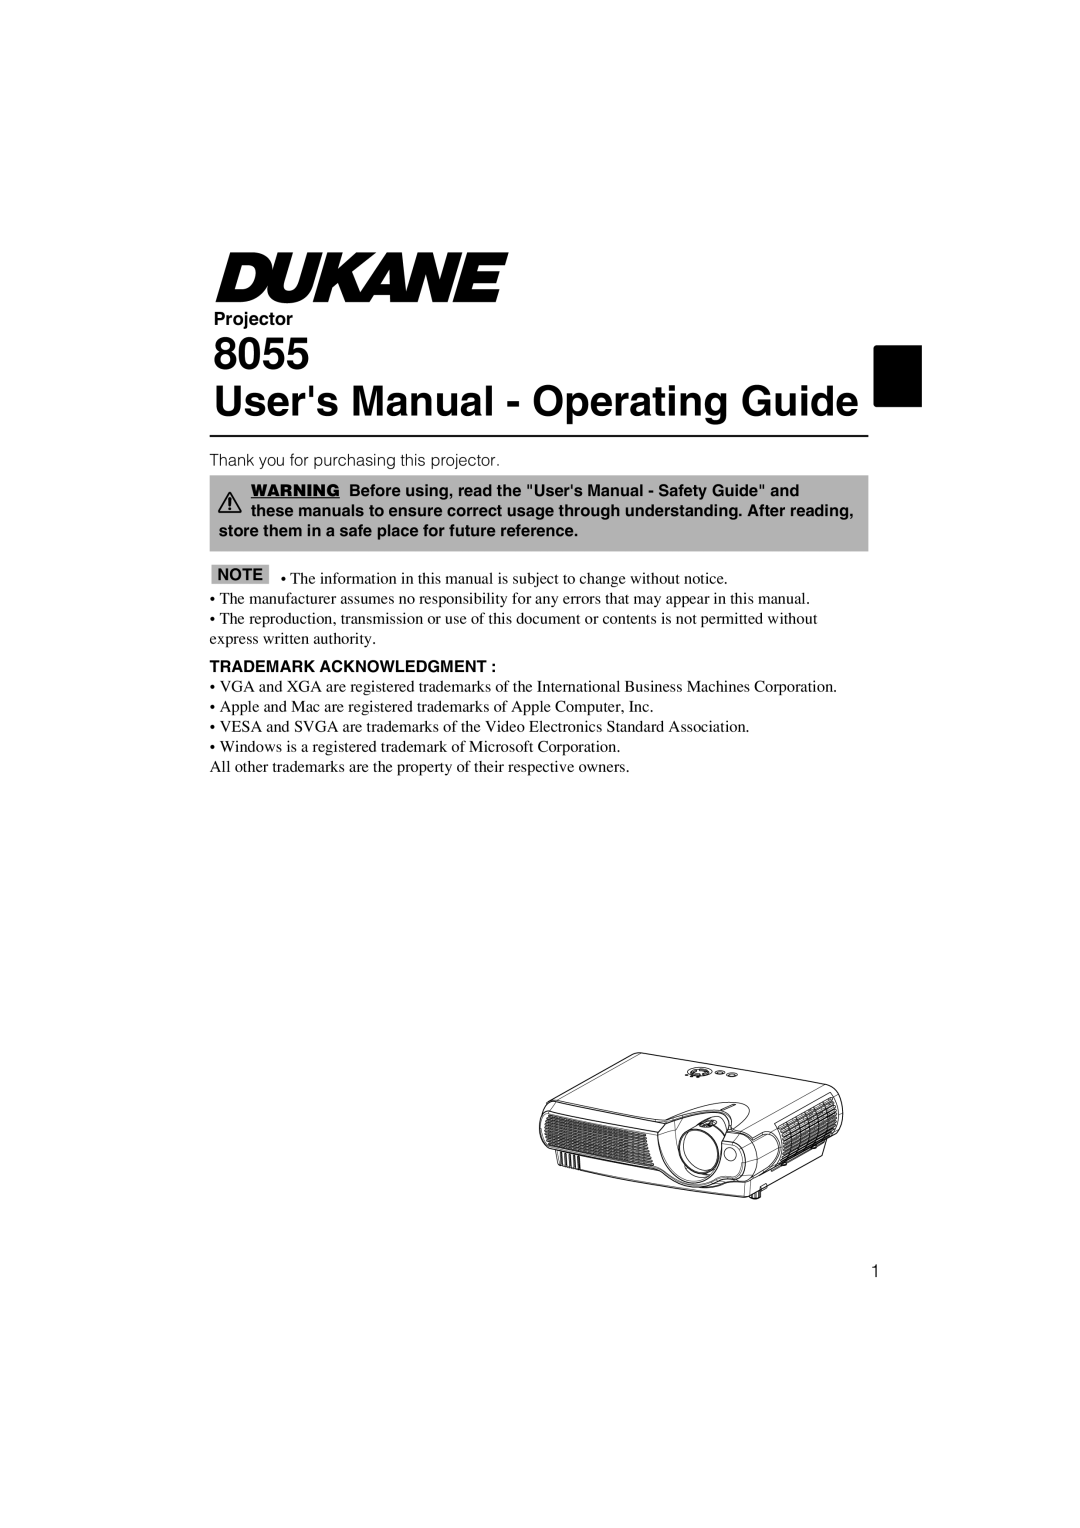 Dukane 8055 Users Manual - Operating Guide, Projector, WARNING Before using, read the Users Manual - Safety Guide and 